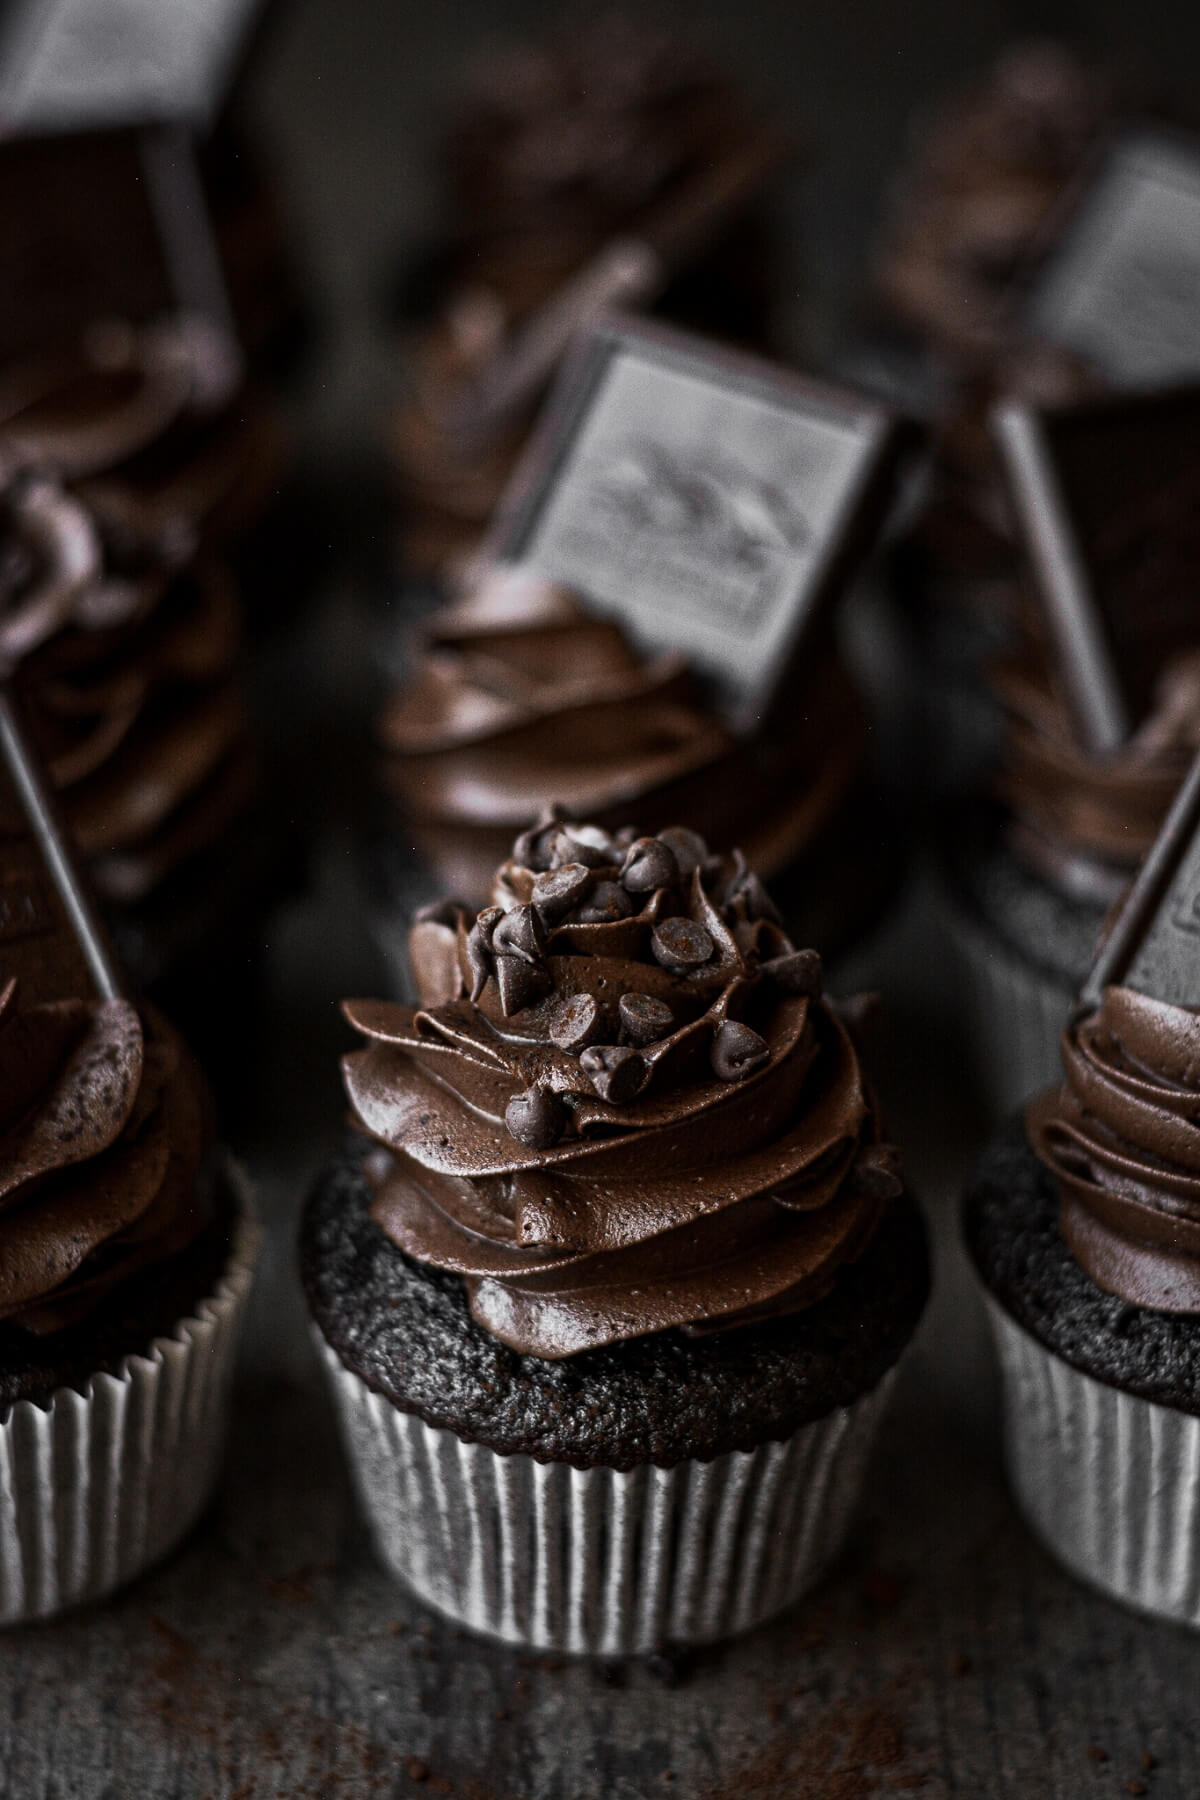 Chocolate cupcakes with chocolate frosting topped with mini chocolate chips.